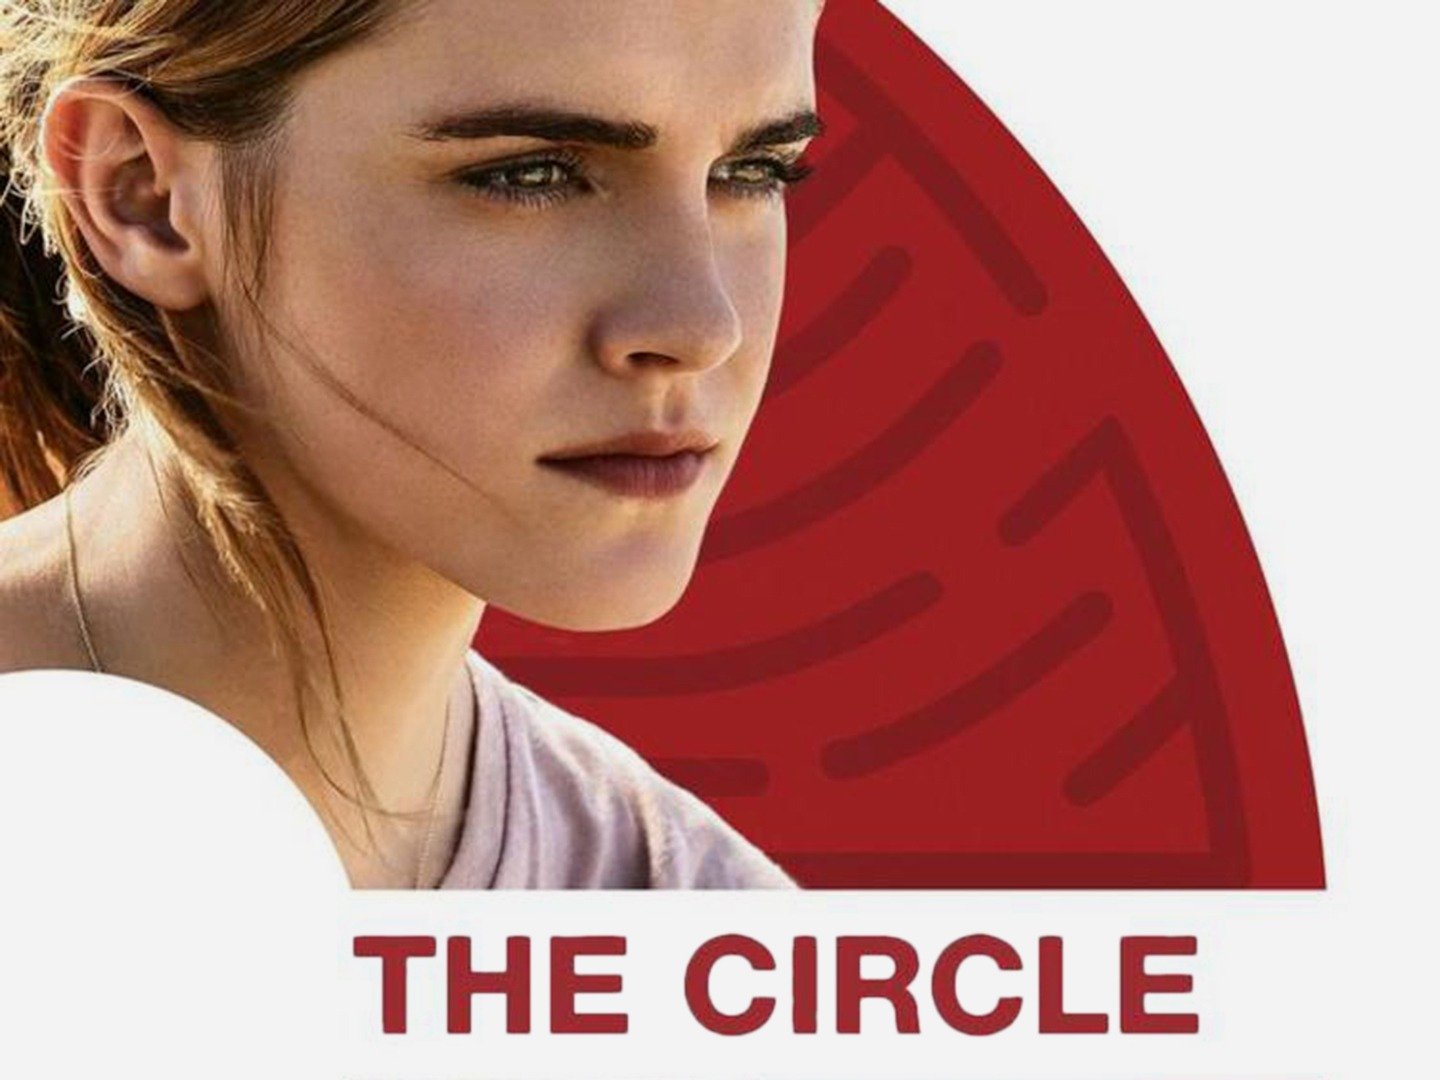 The Circle Trailer 2 Trailers & Videos Rotten Tomatoes